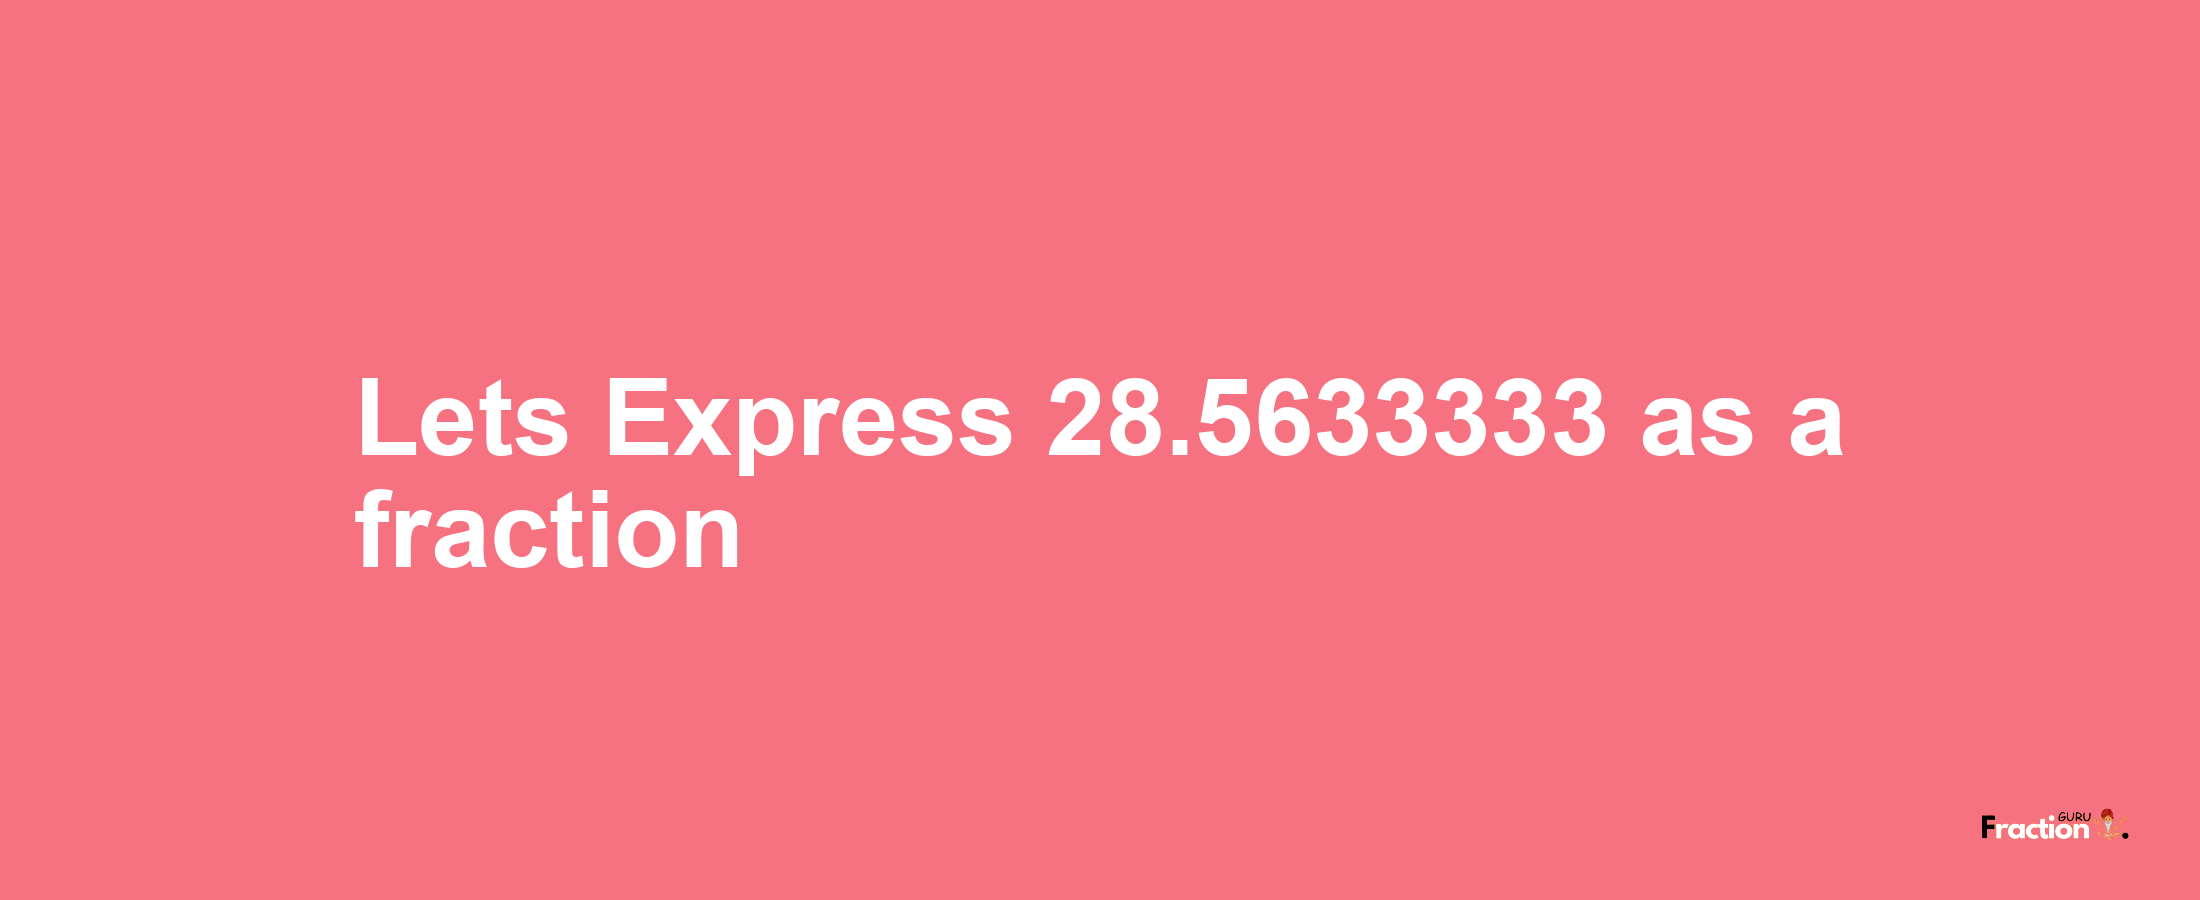 Lets Express 28.5633333 as afraction